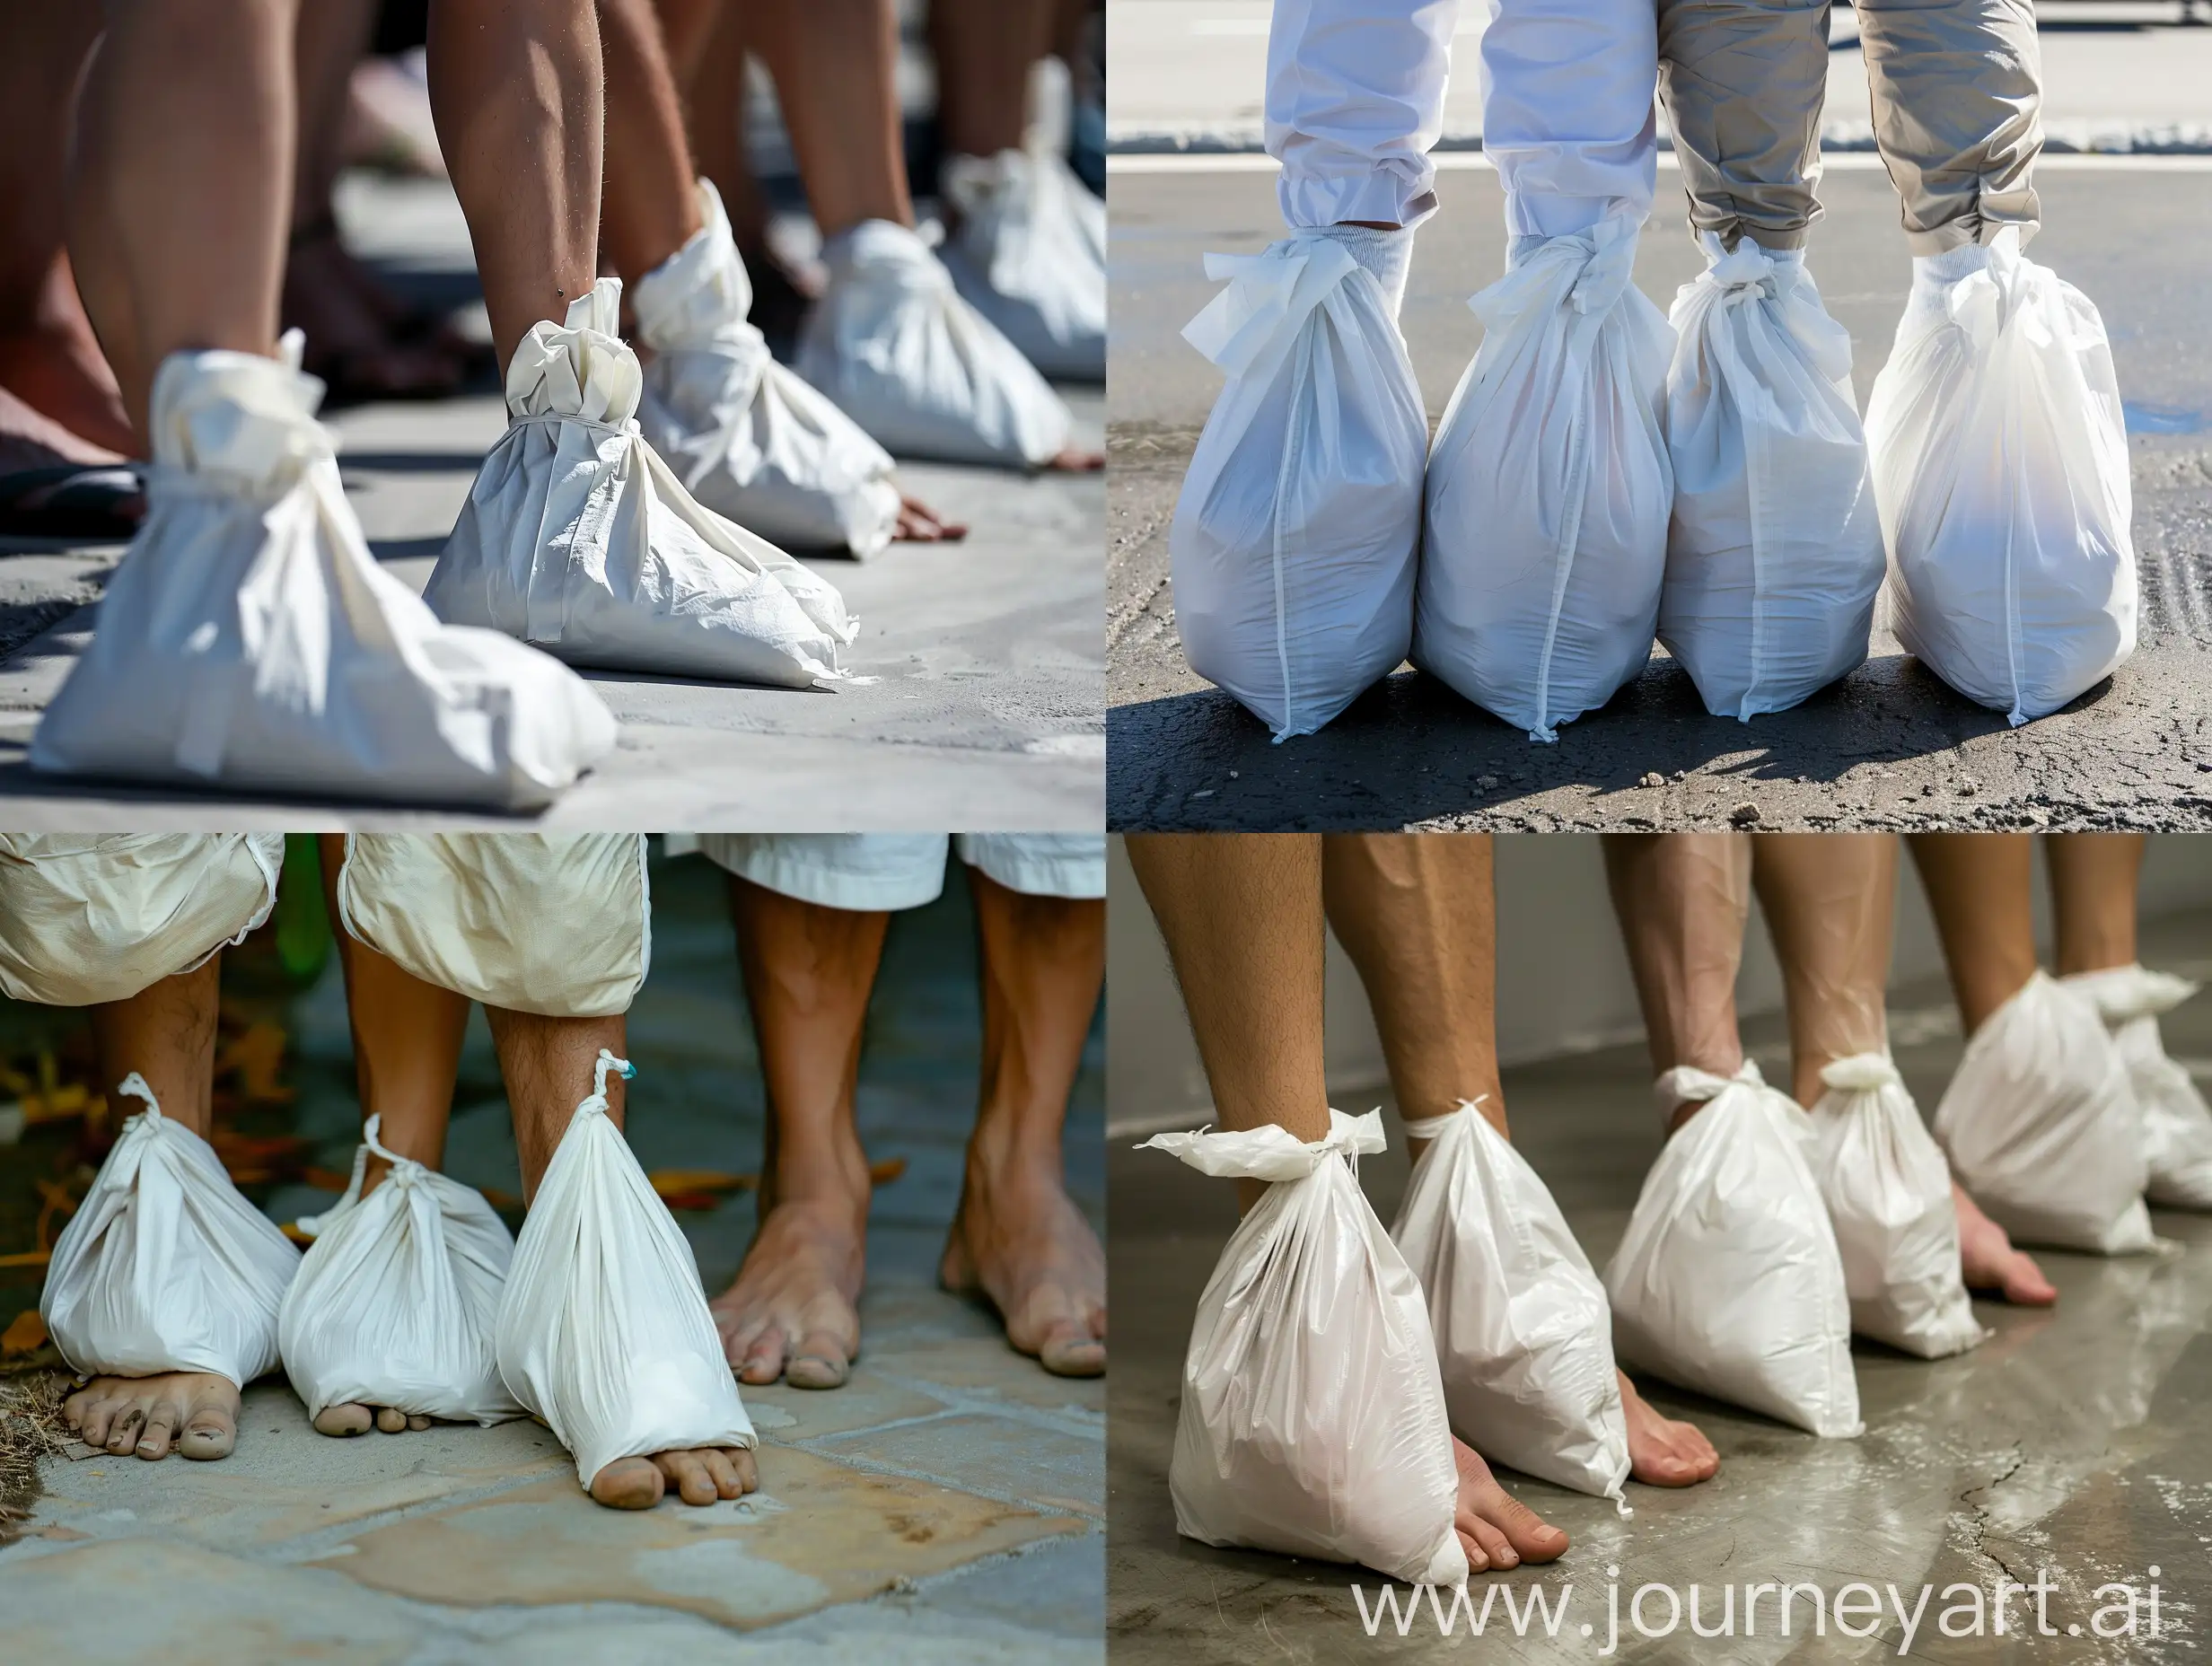 People-Wearing-White-Bags-on-Feet-in-a-Surreal-Setting